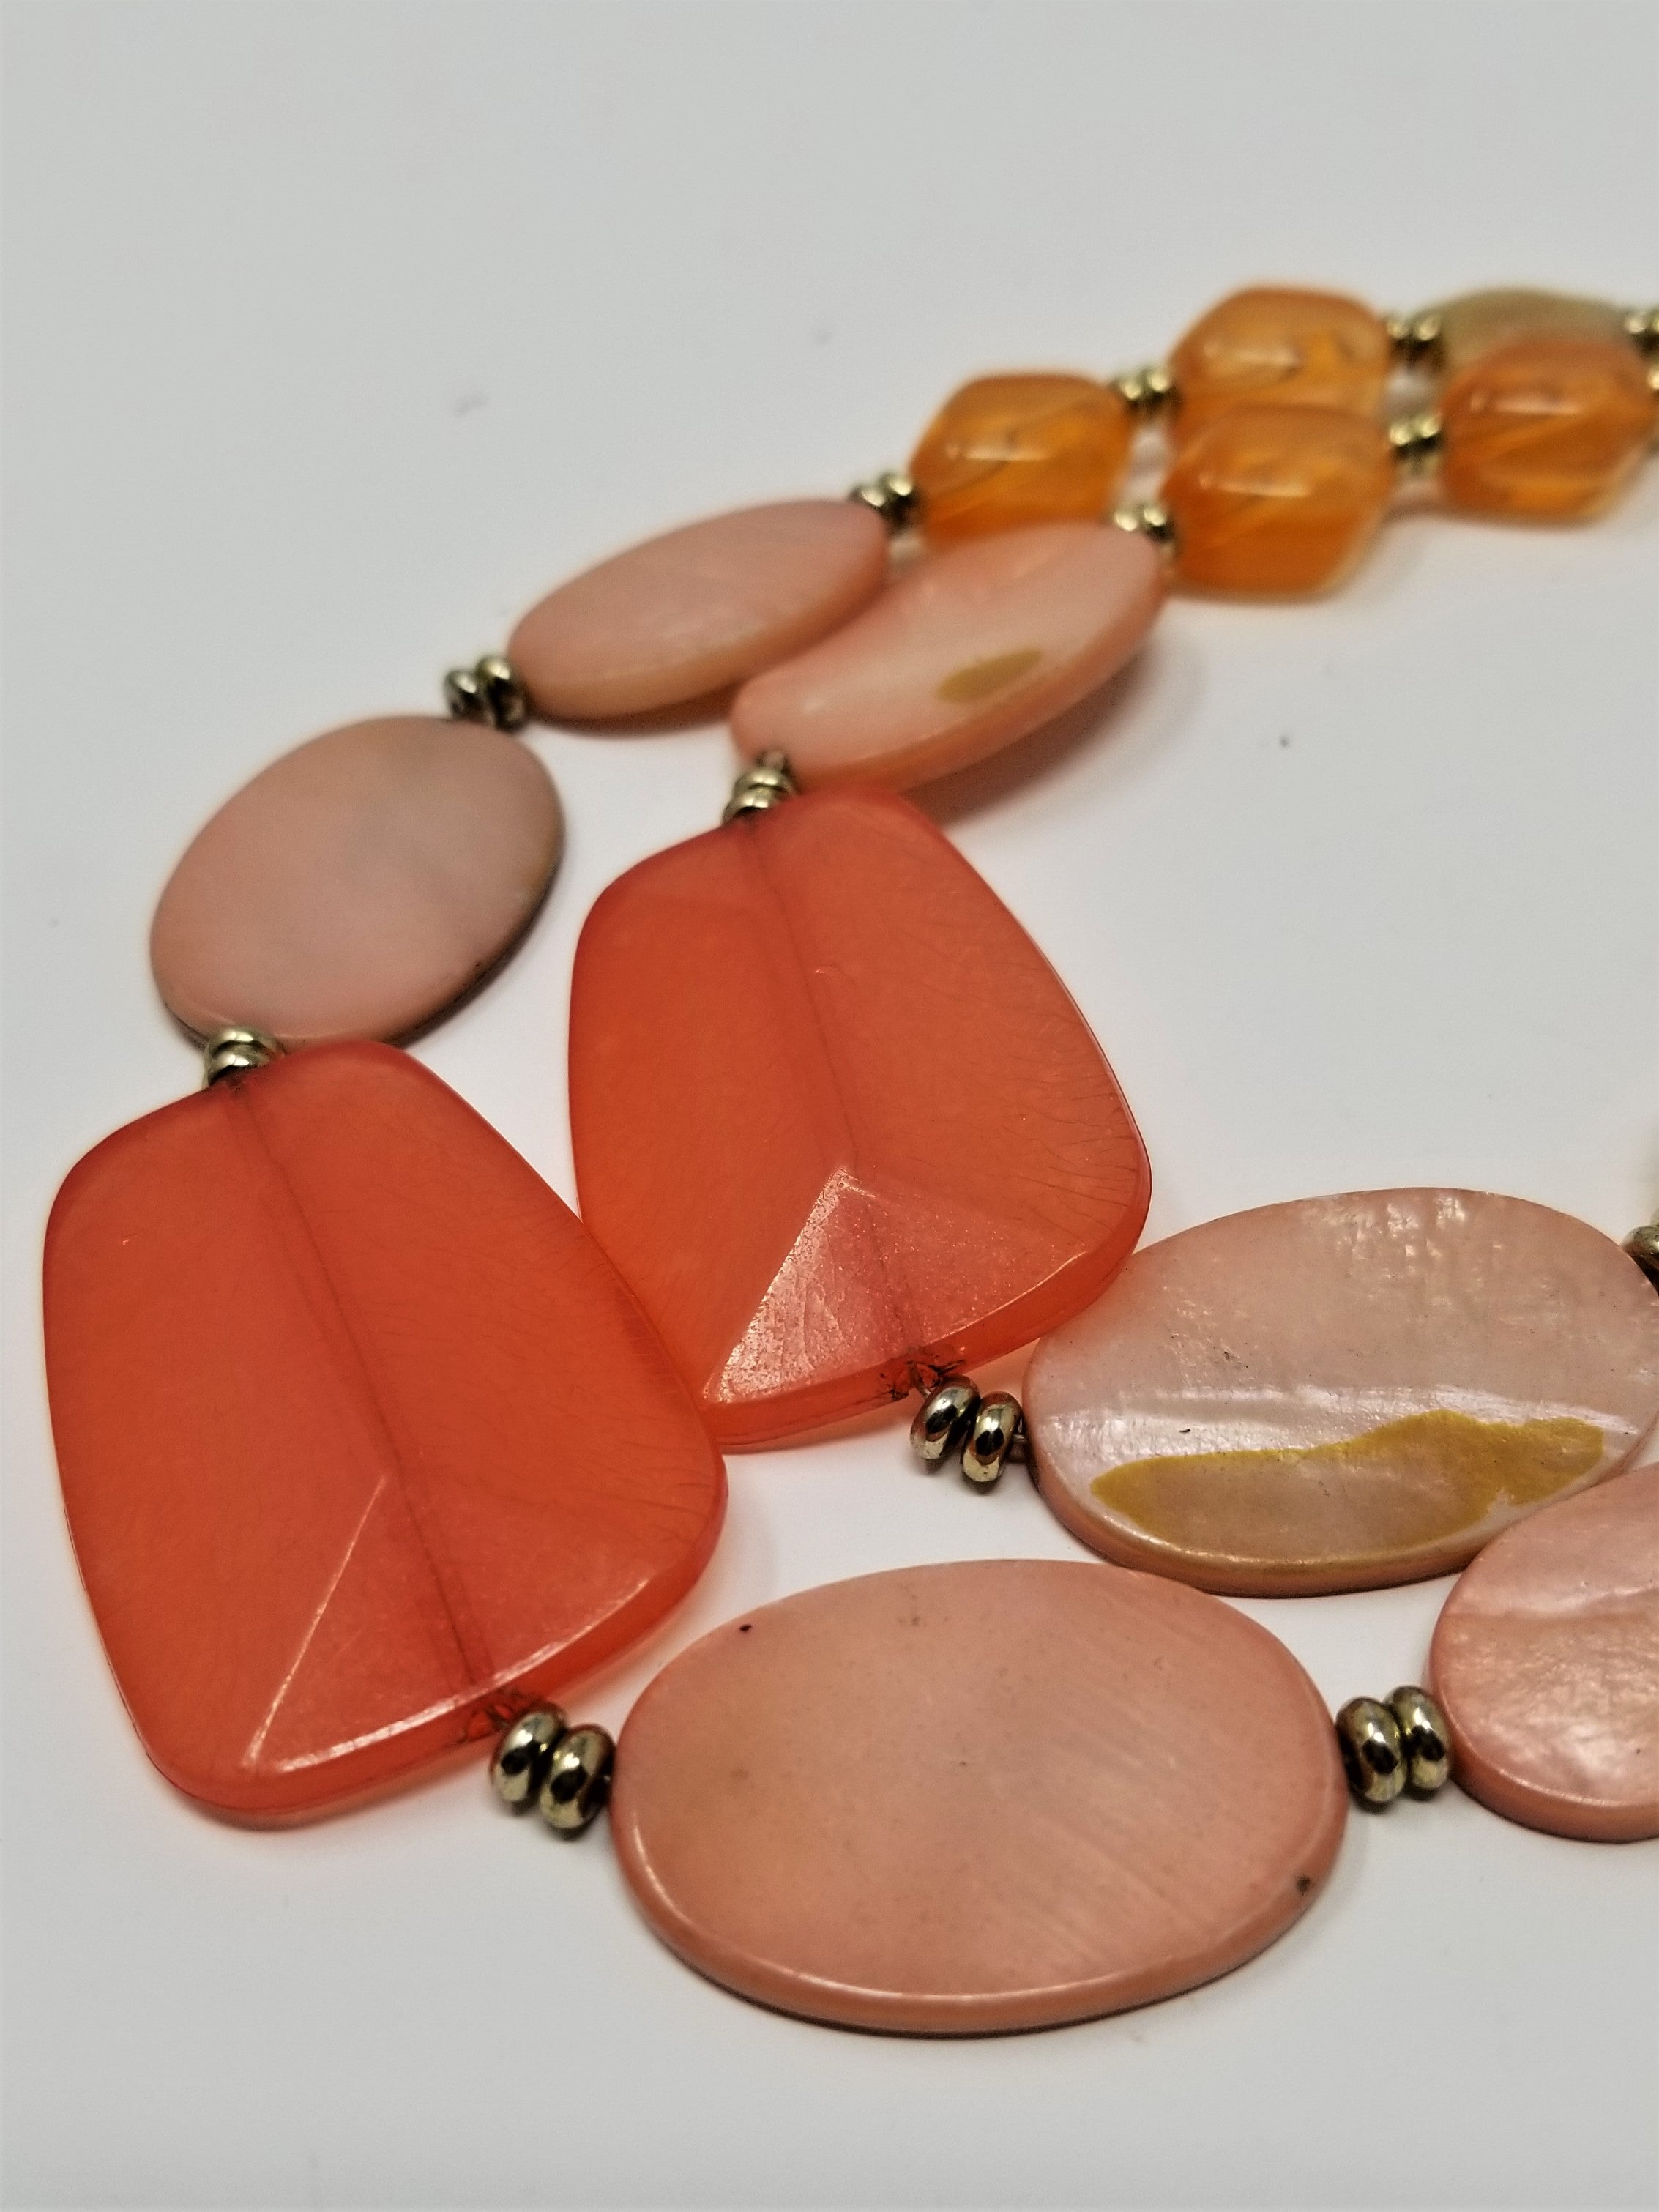 Pink and Salmon color Statement Necklace Two Strand MOP